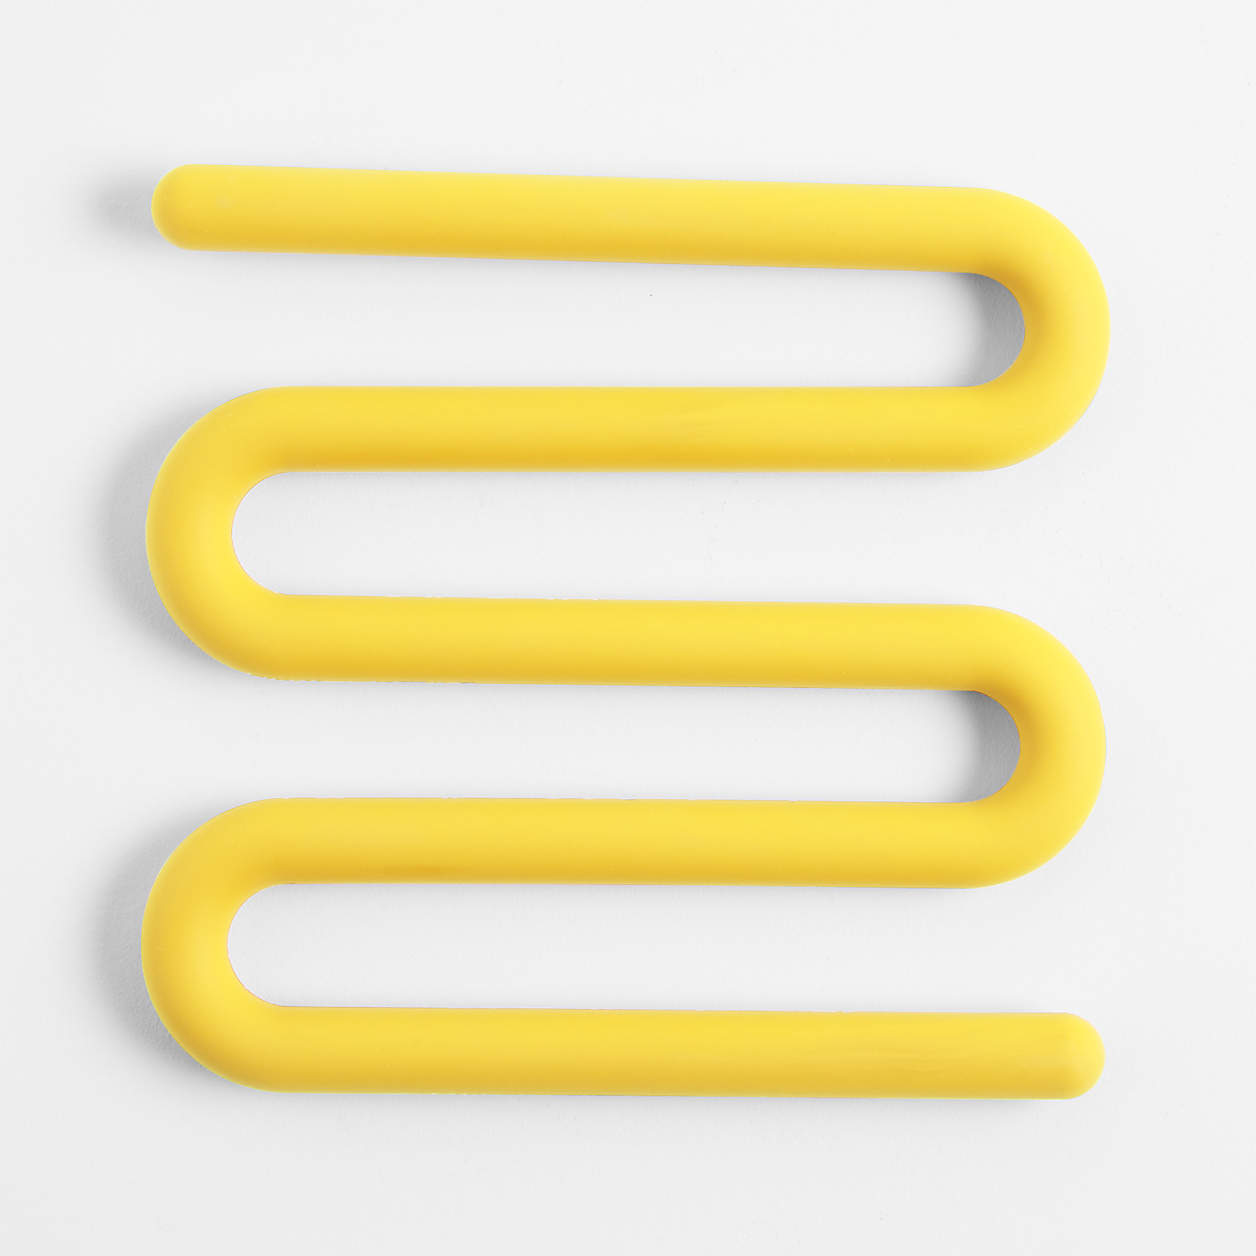 Yellow Silicone Trivet by Molly Baz - Molly Baz Collection at Crate & Barrel
